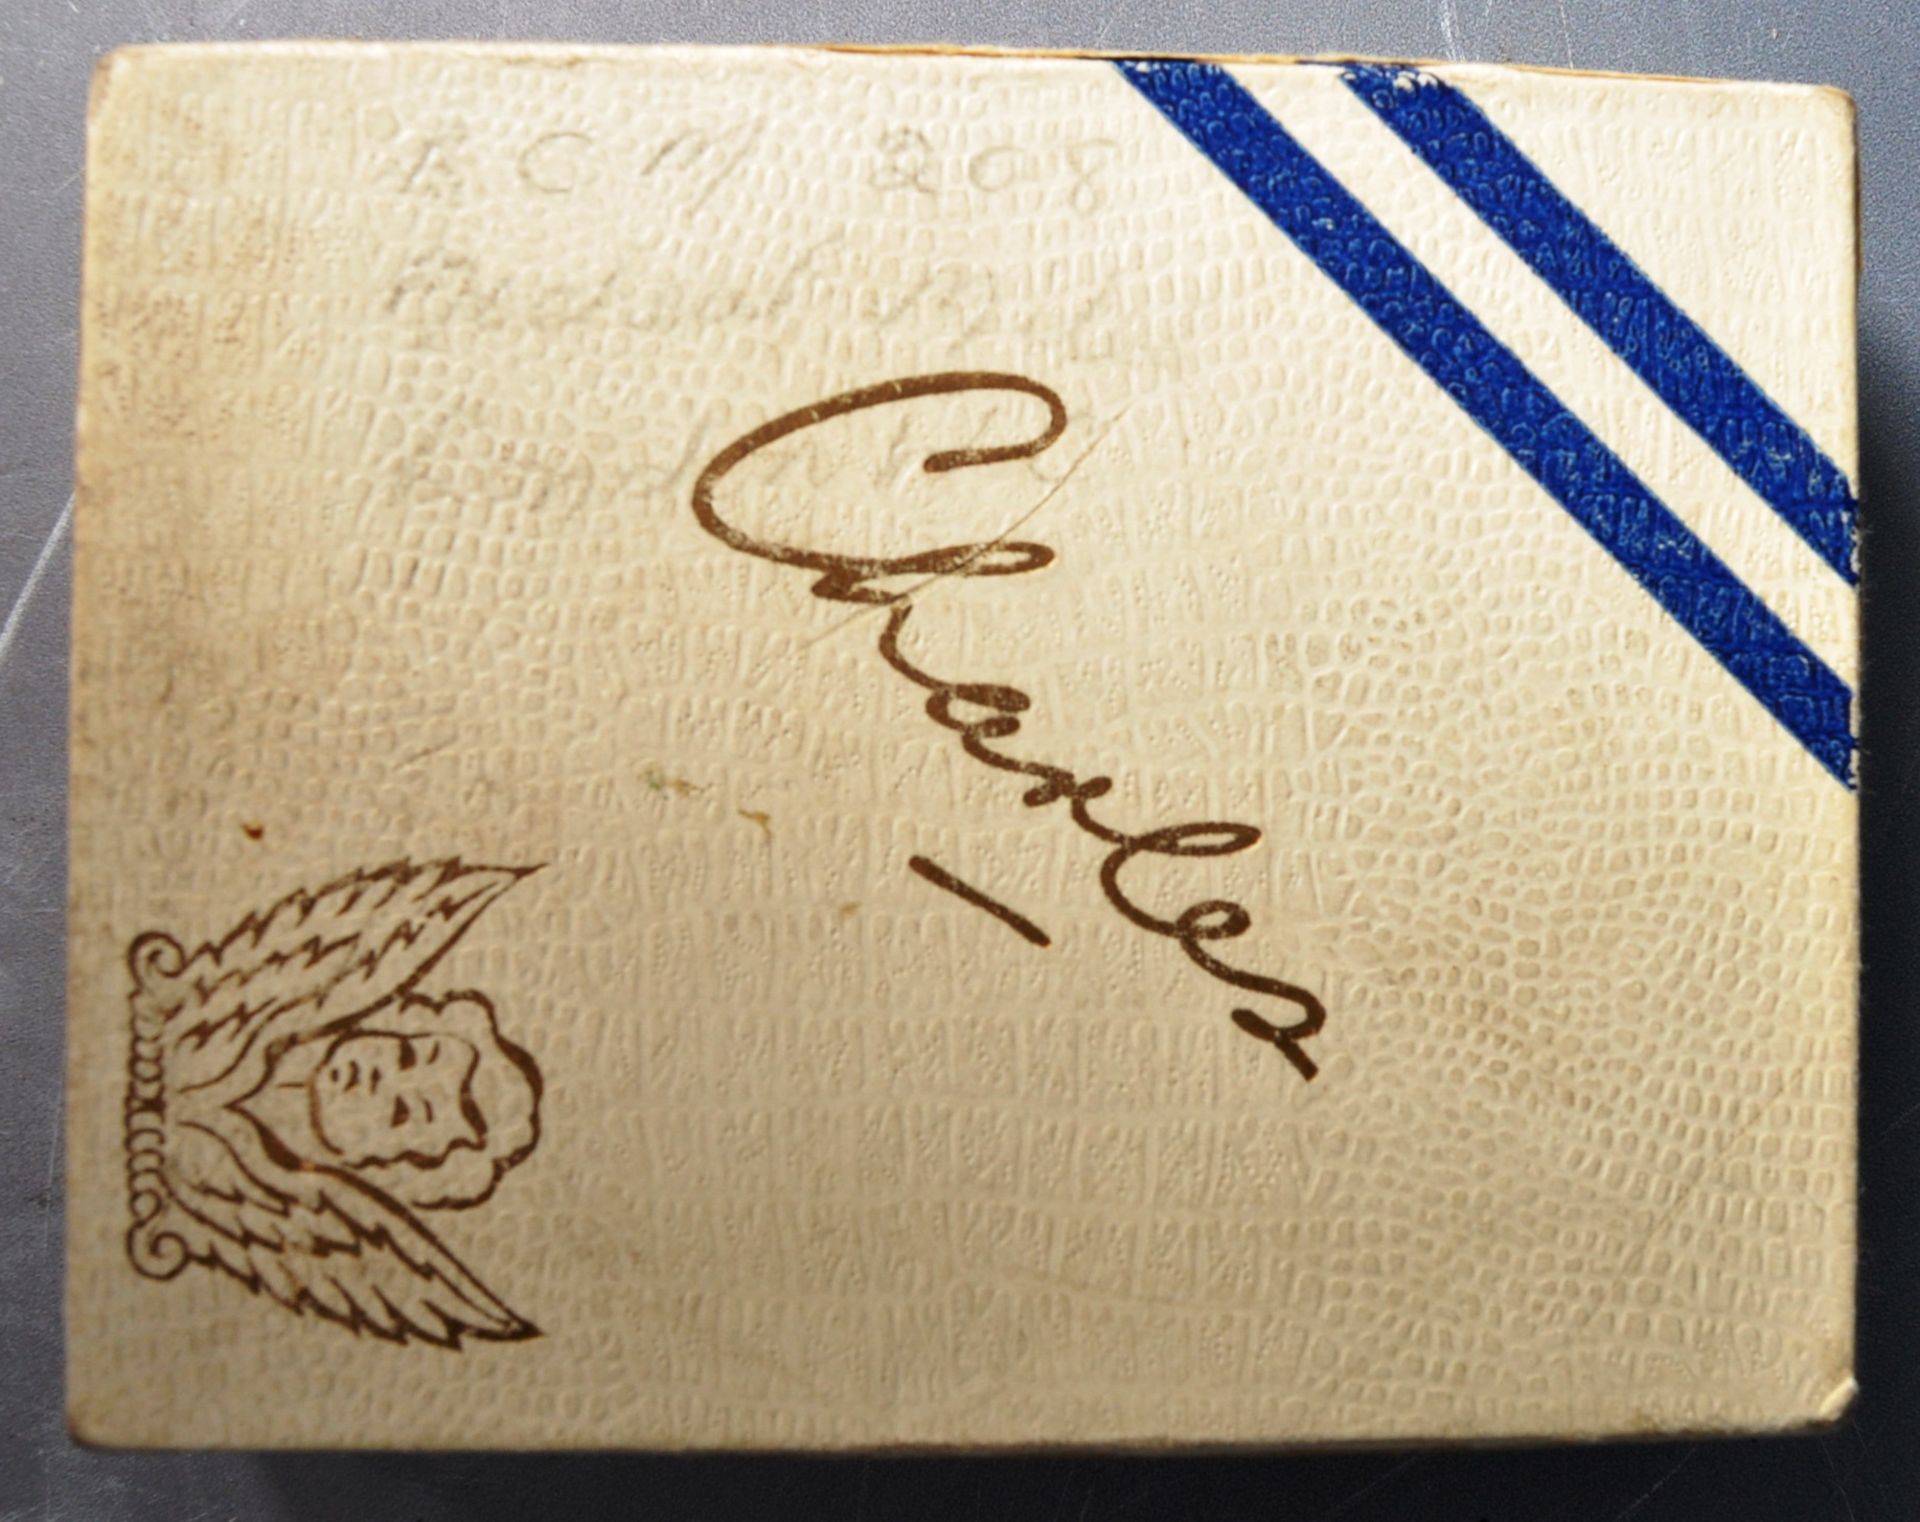 EARLY 20TH CENTURY THE CHARLES BOXED LIGHTER - Image 10 of 10